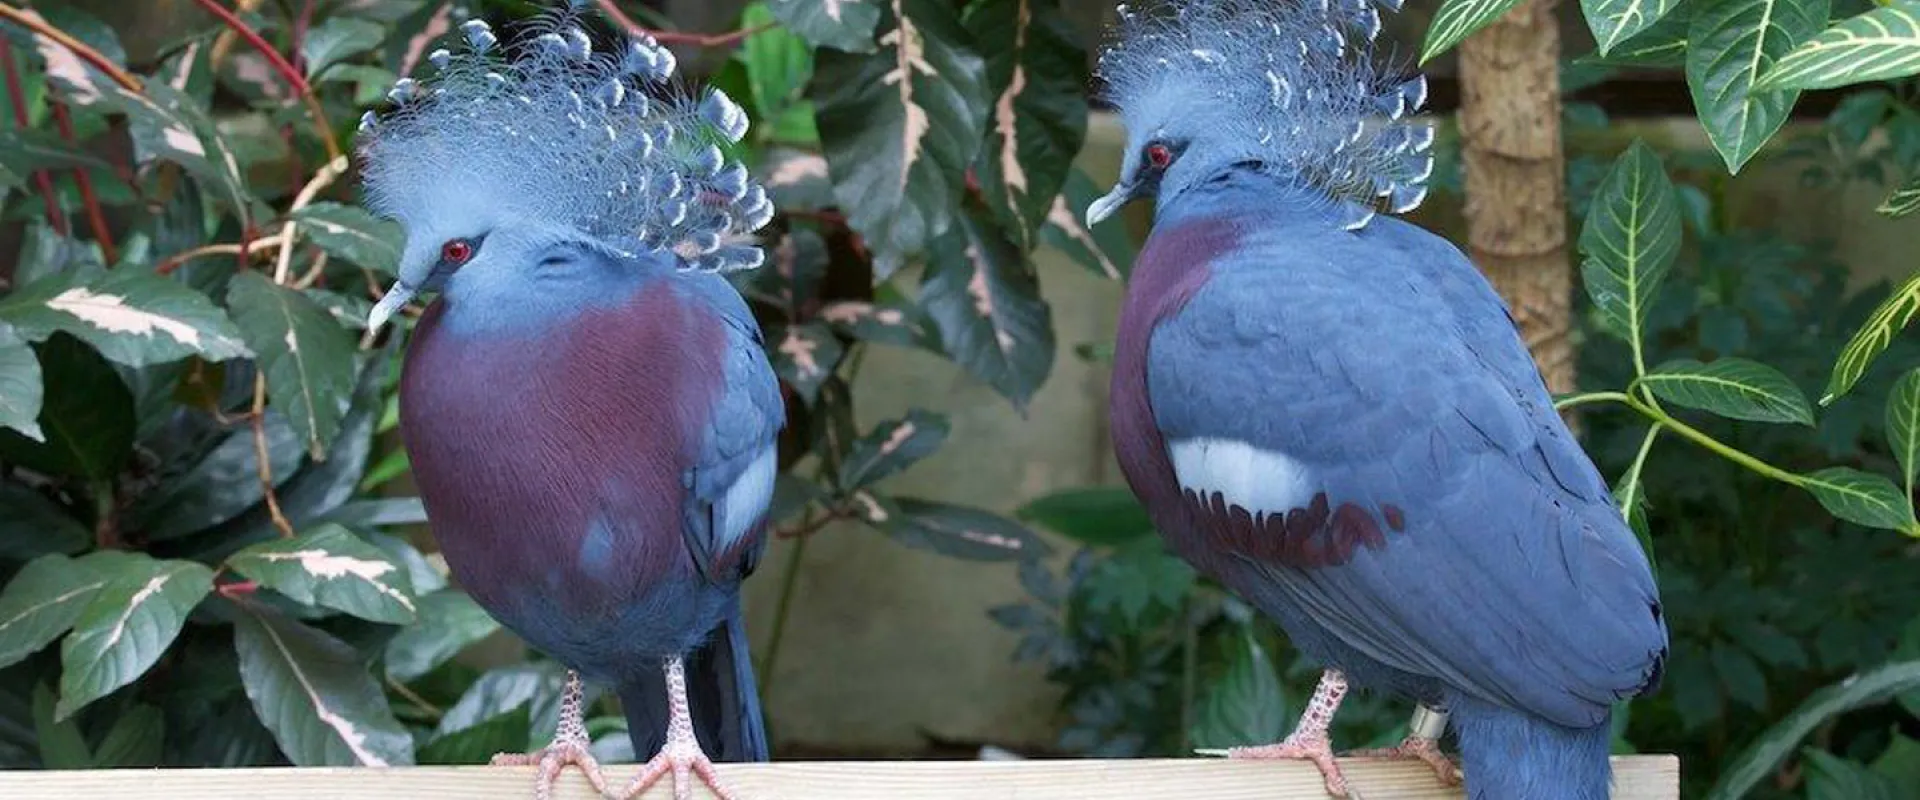 A Royal Family: Victoria-crowned Pigeons